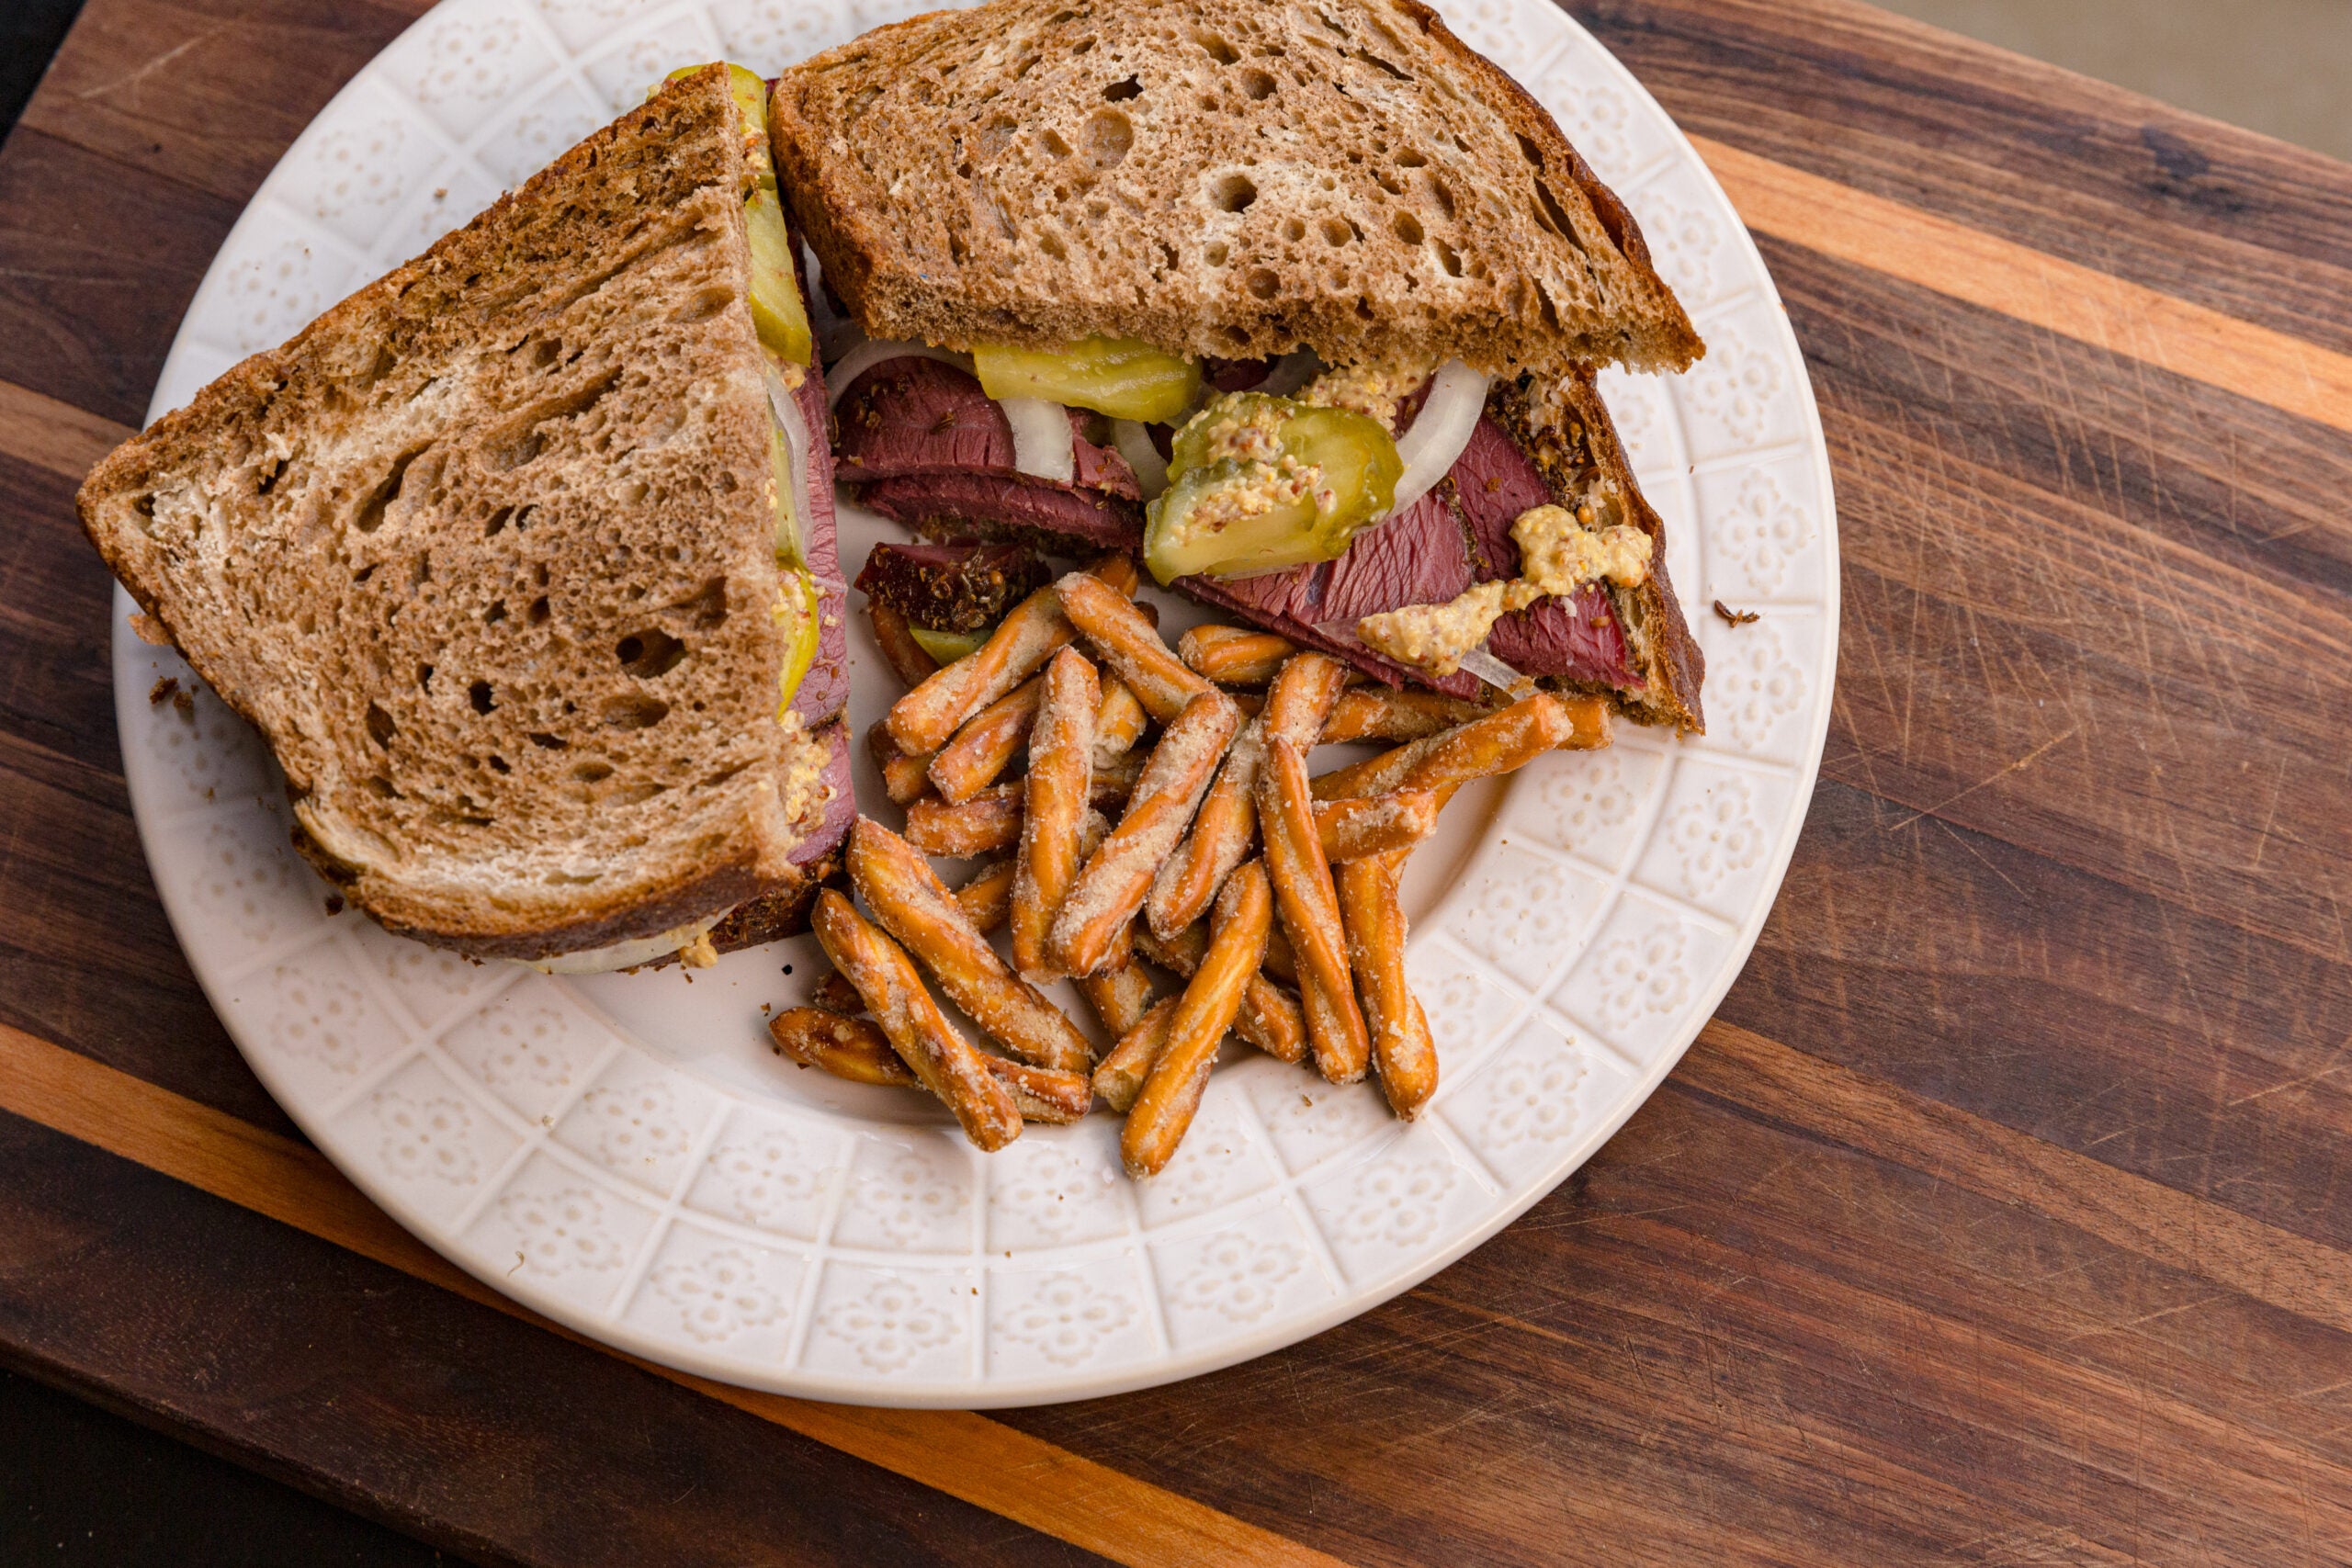 A venison pastrami sandwich on a white plate with a side of pretzels.